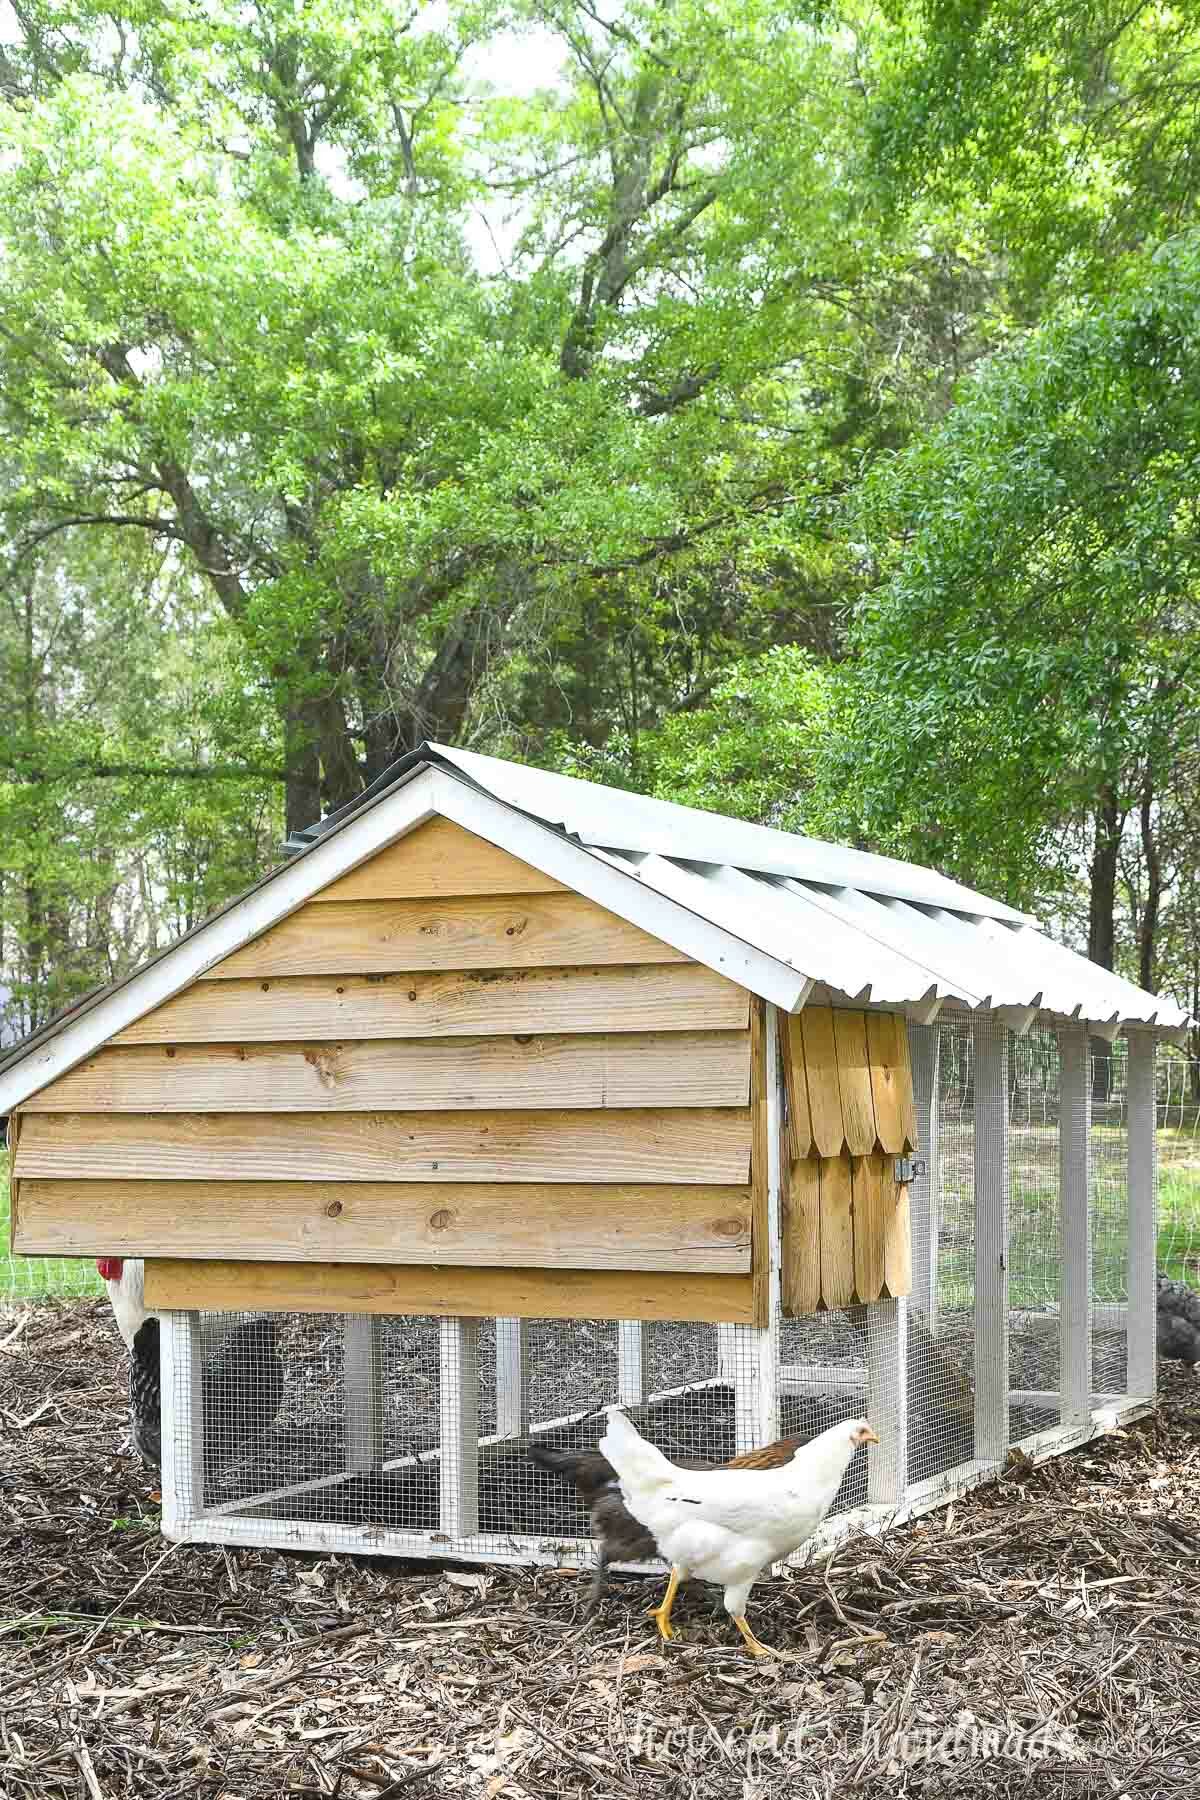 Small chicken coop clad in siding made from fence pickets with metal roof. 